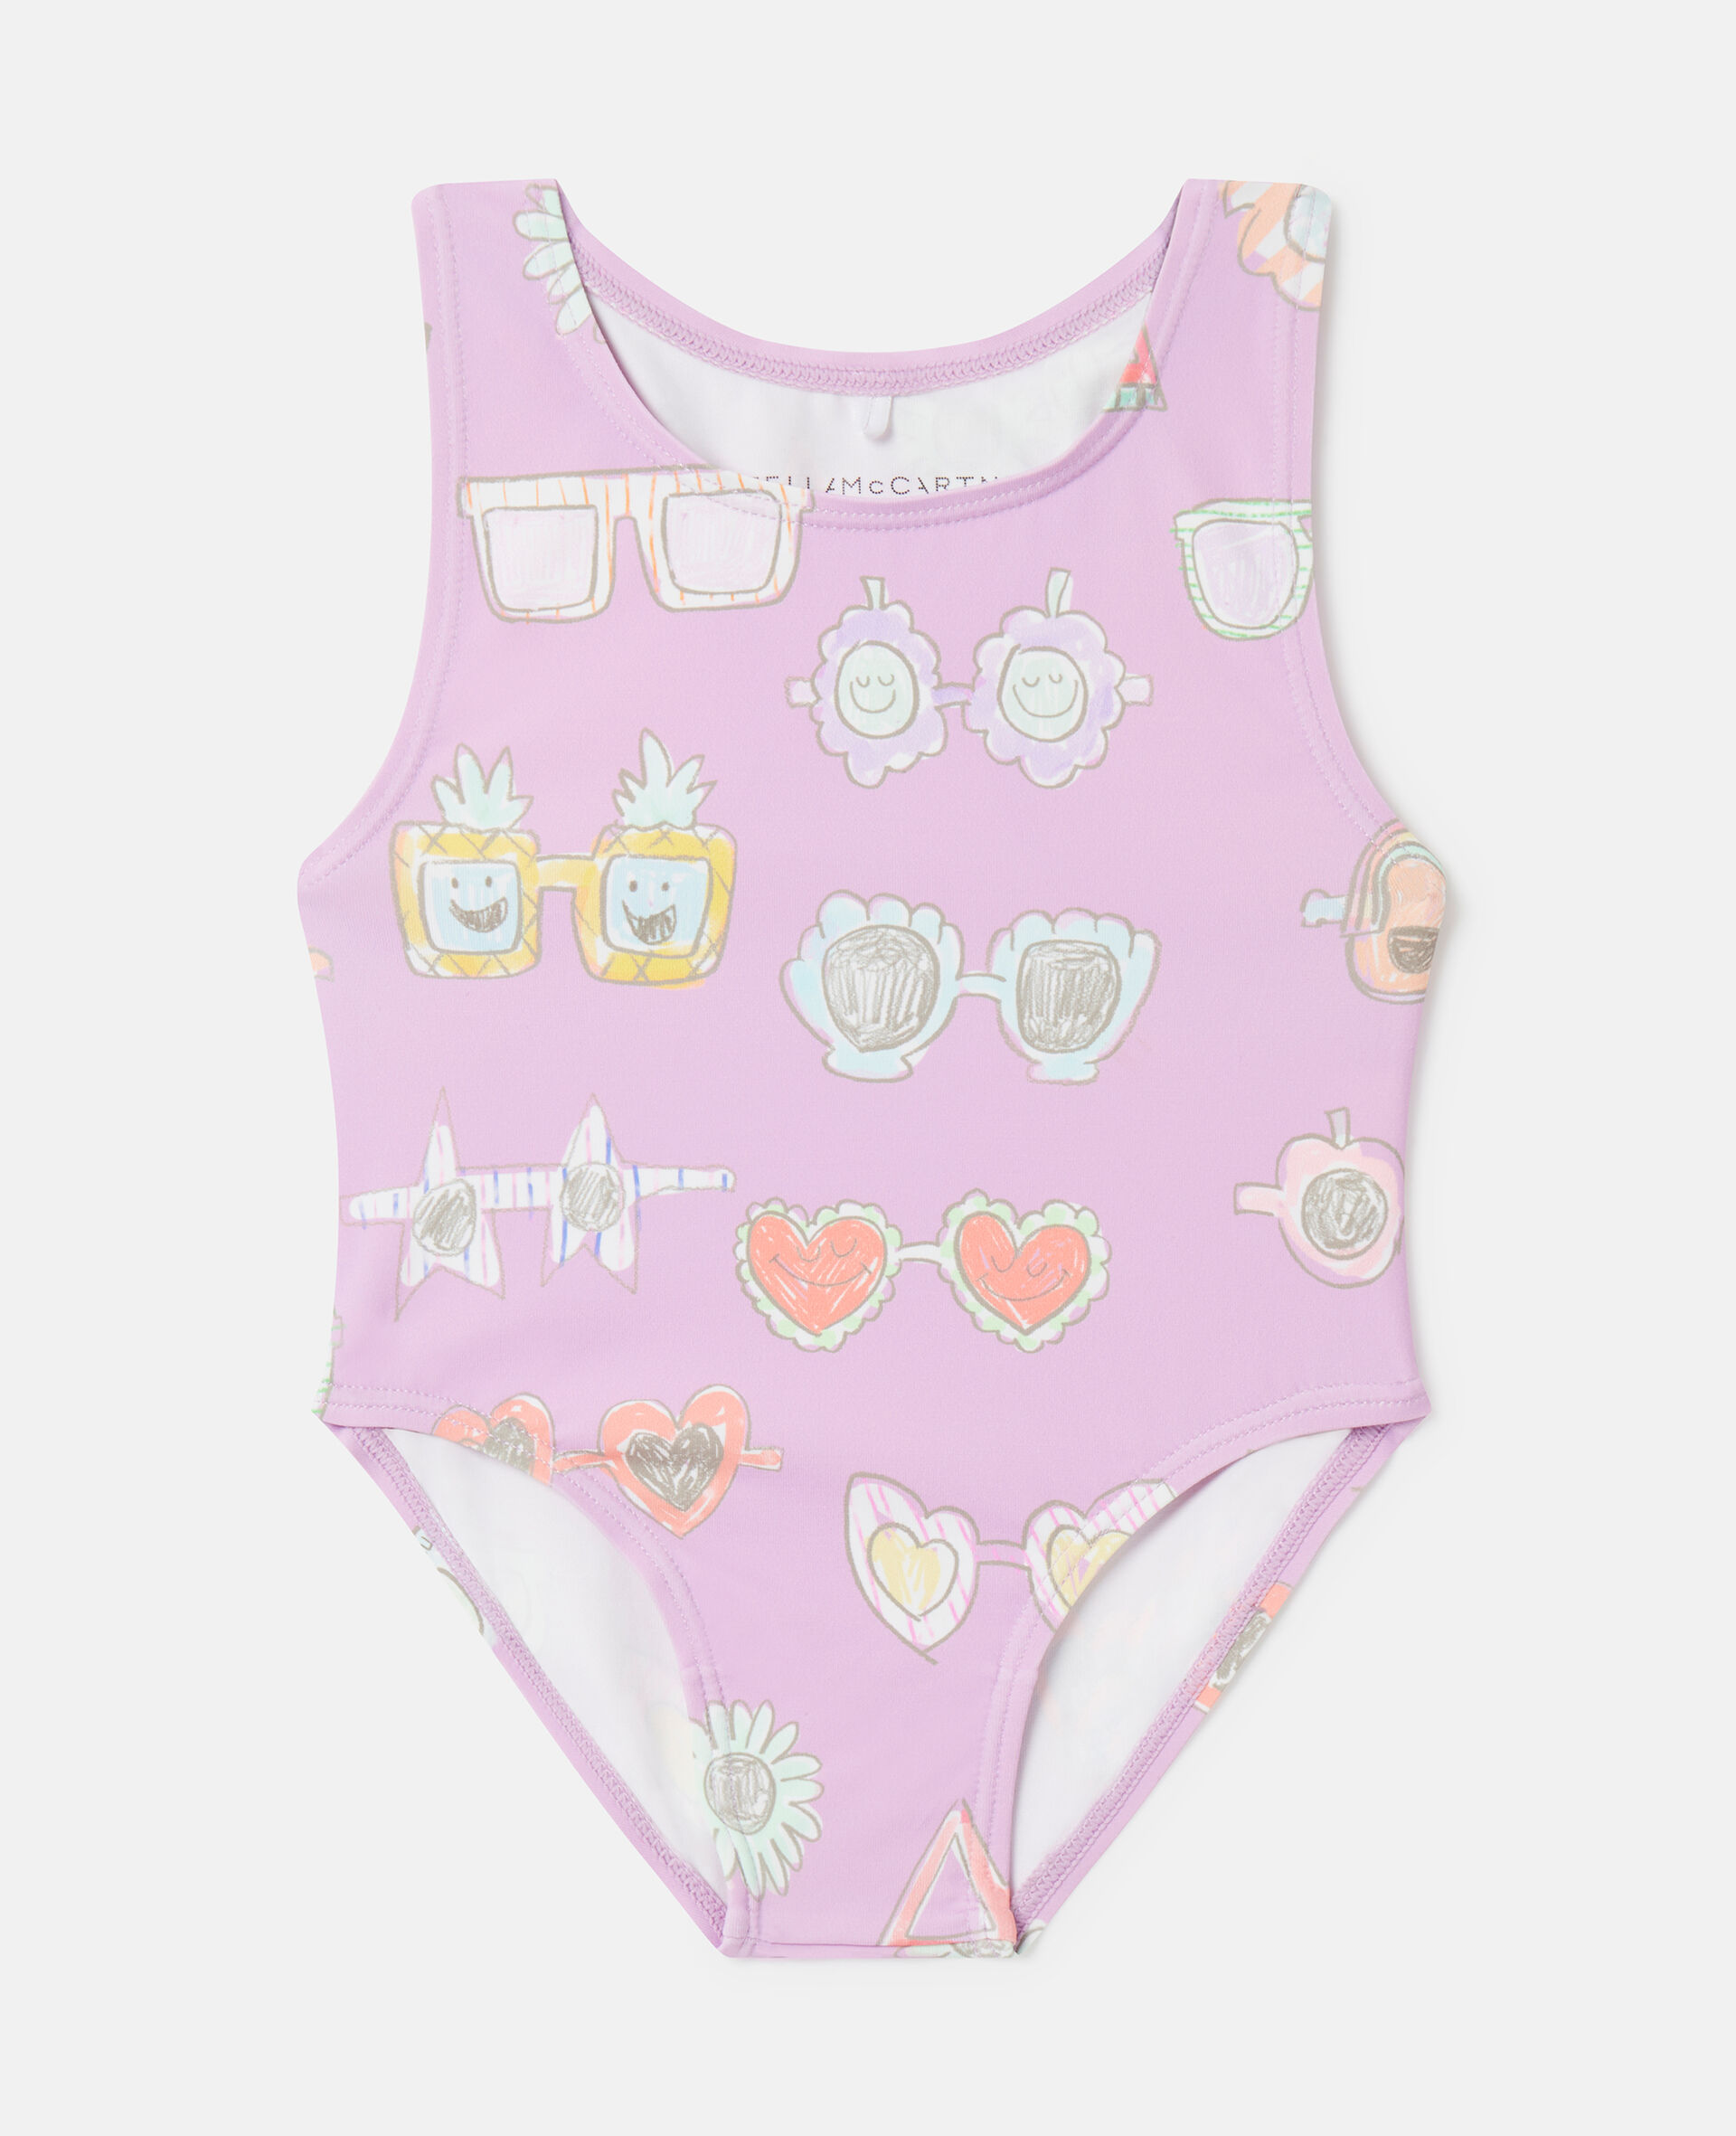 Sunglasses Doodle Print Swimsuit-Pink-large image number 0